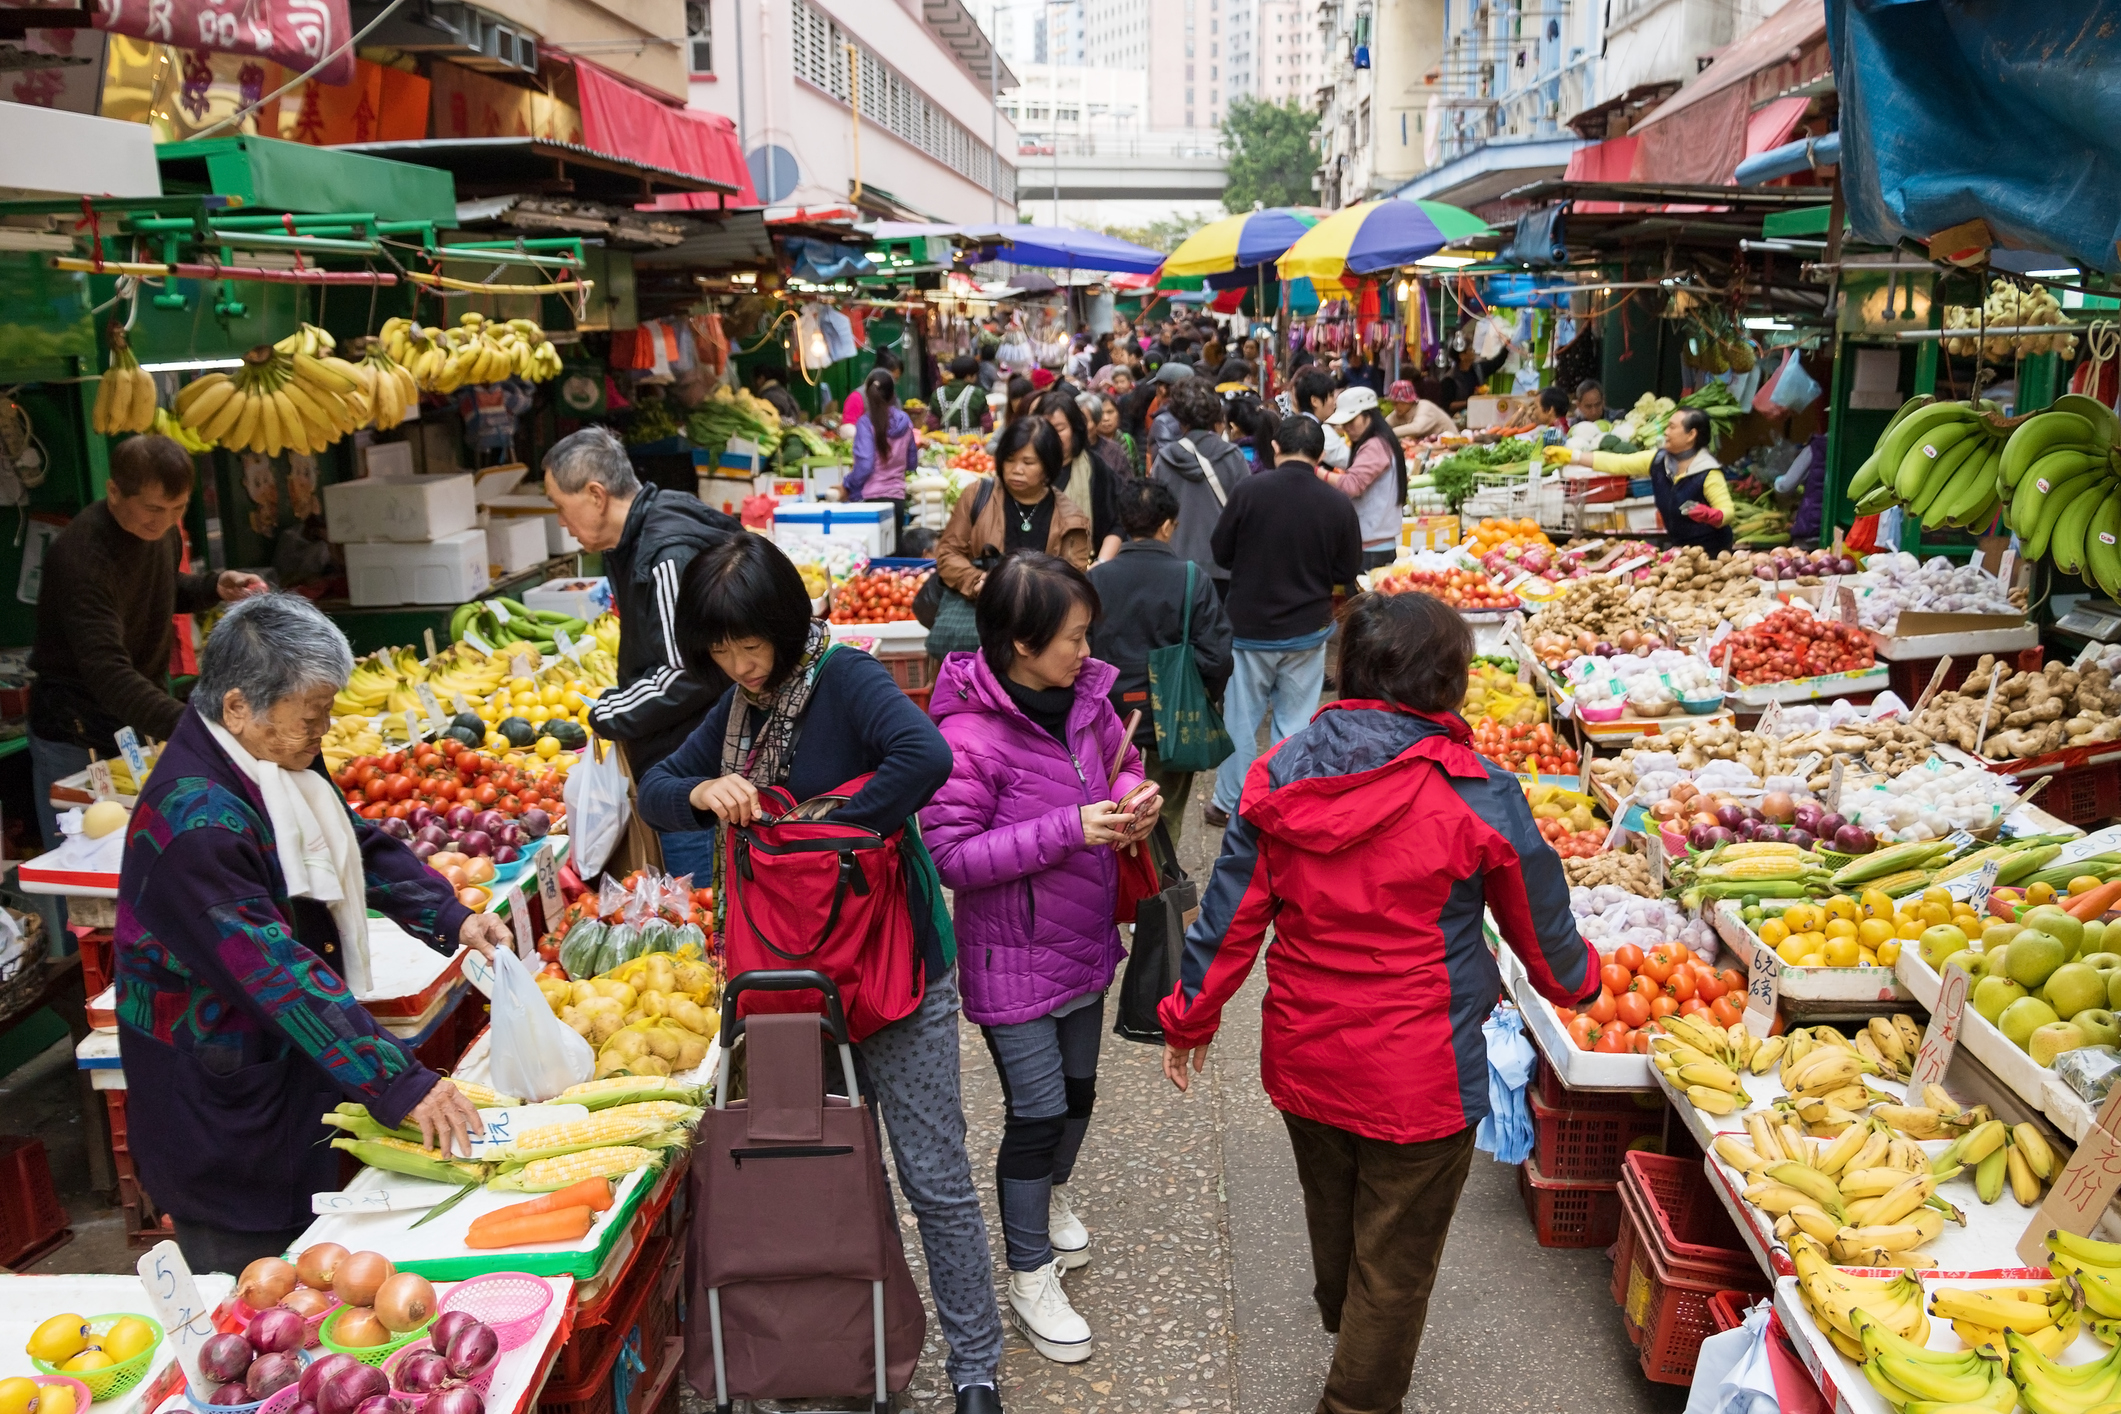 People shopping at a bustling outdoor fruit and vegetable market with various produce on display